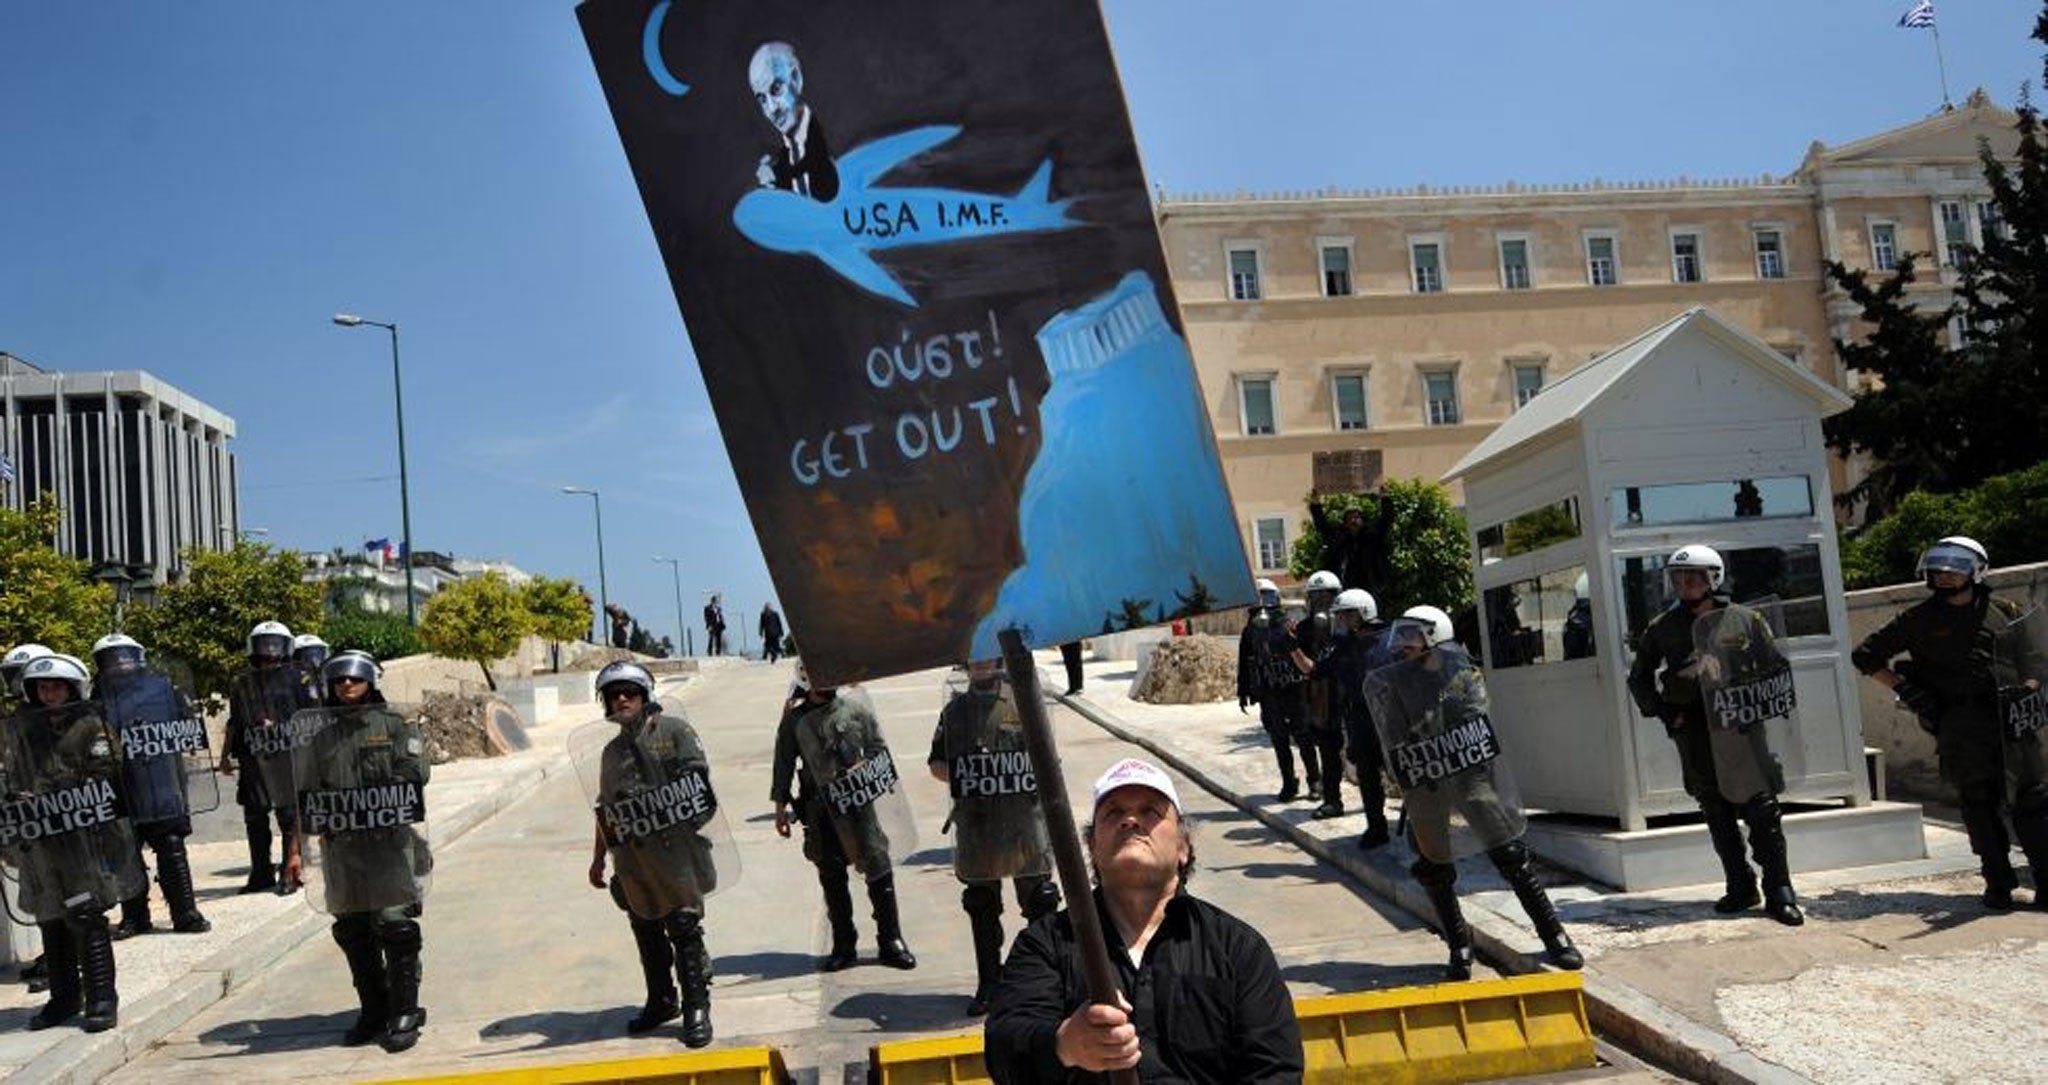 A protester is blocked in by police as he demonstrates against austerity measures in Greece